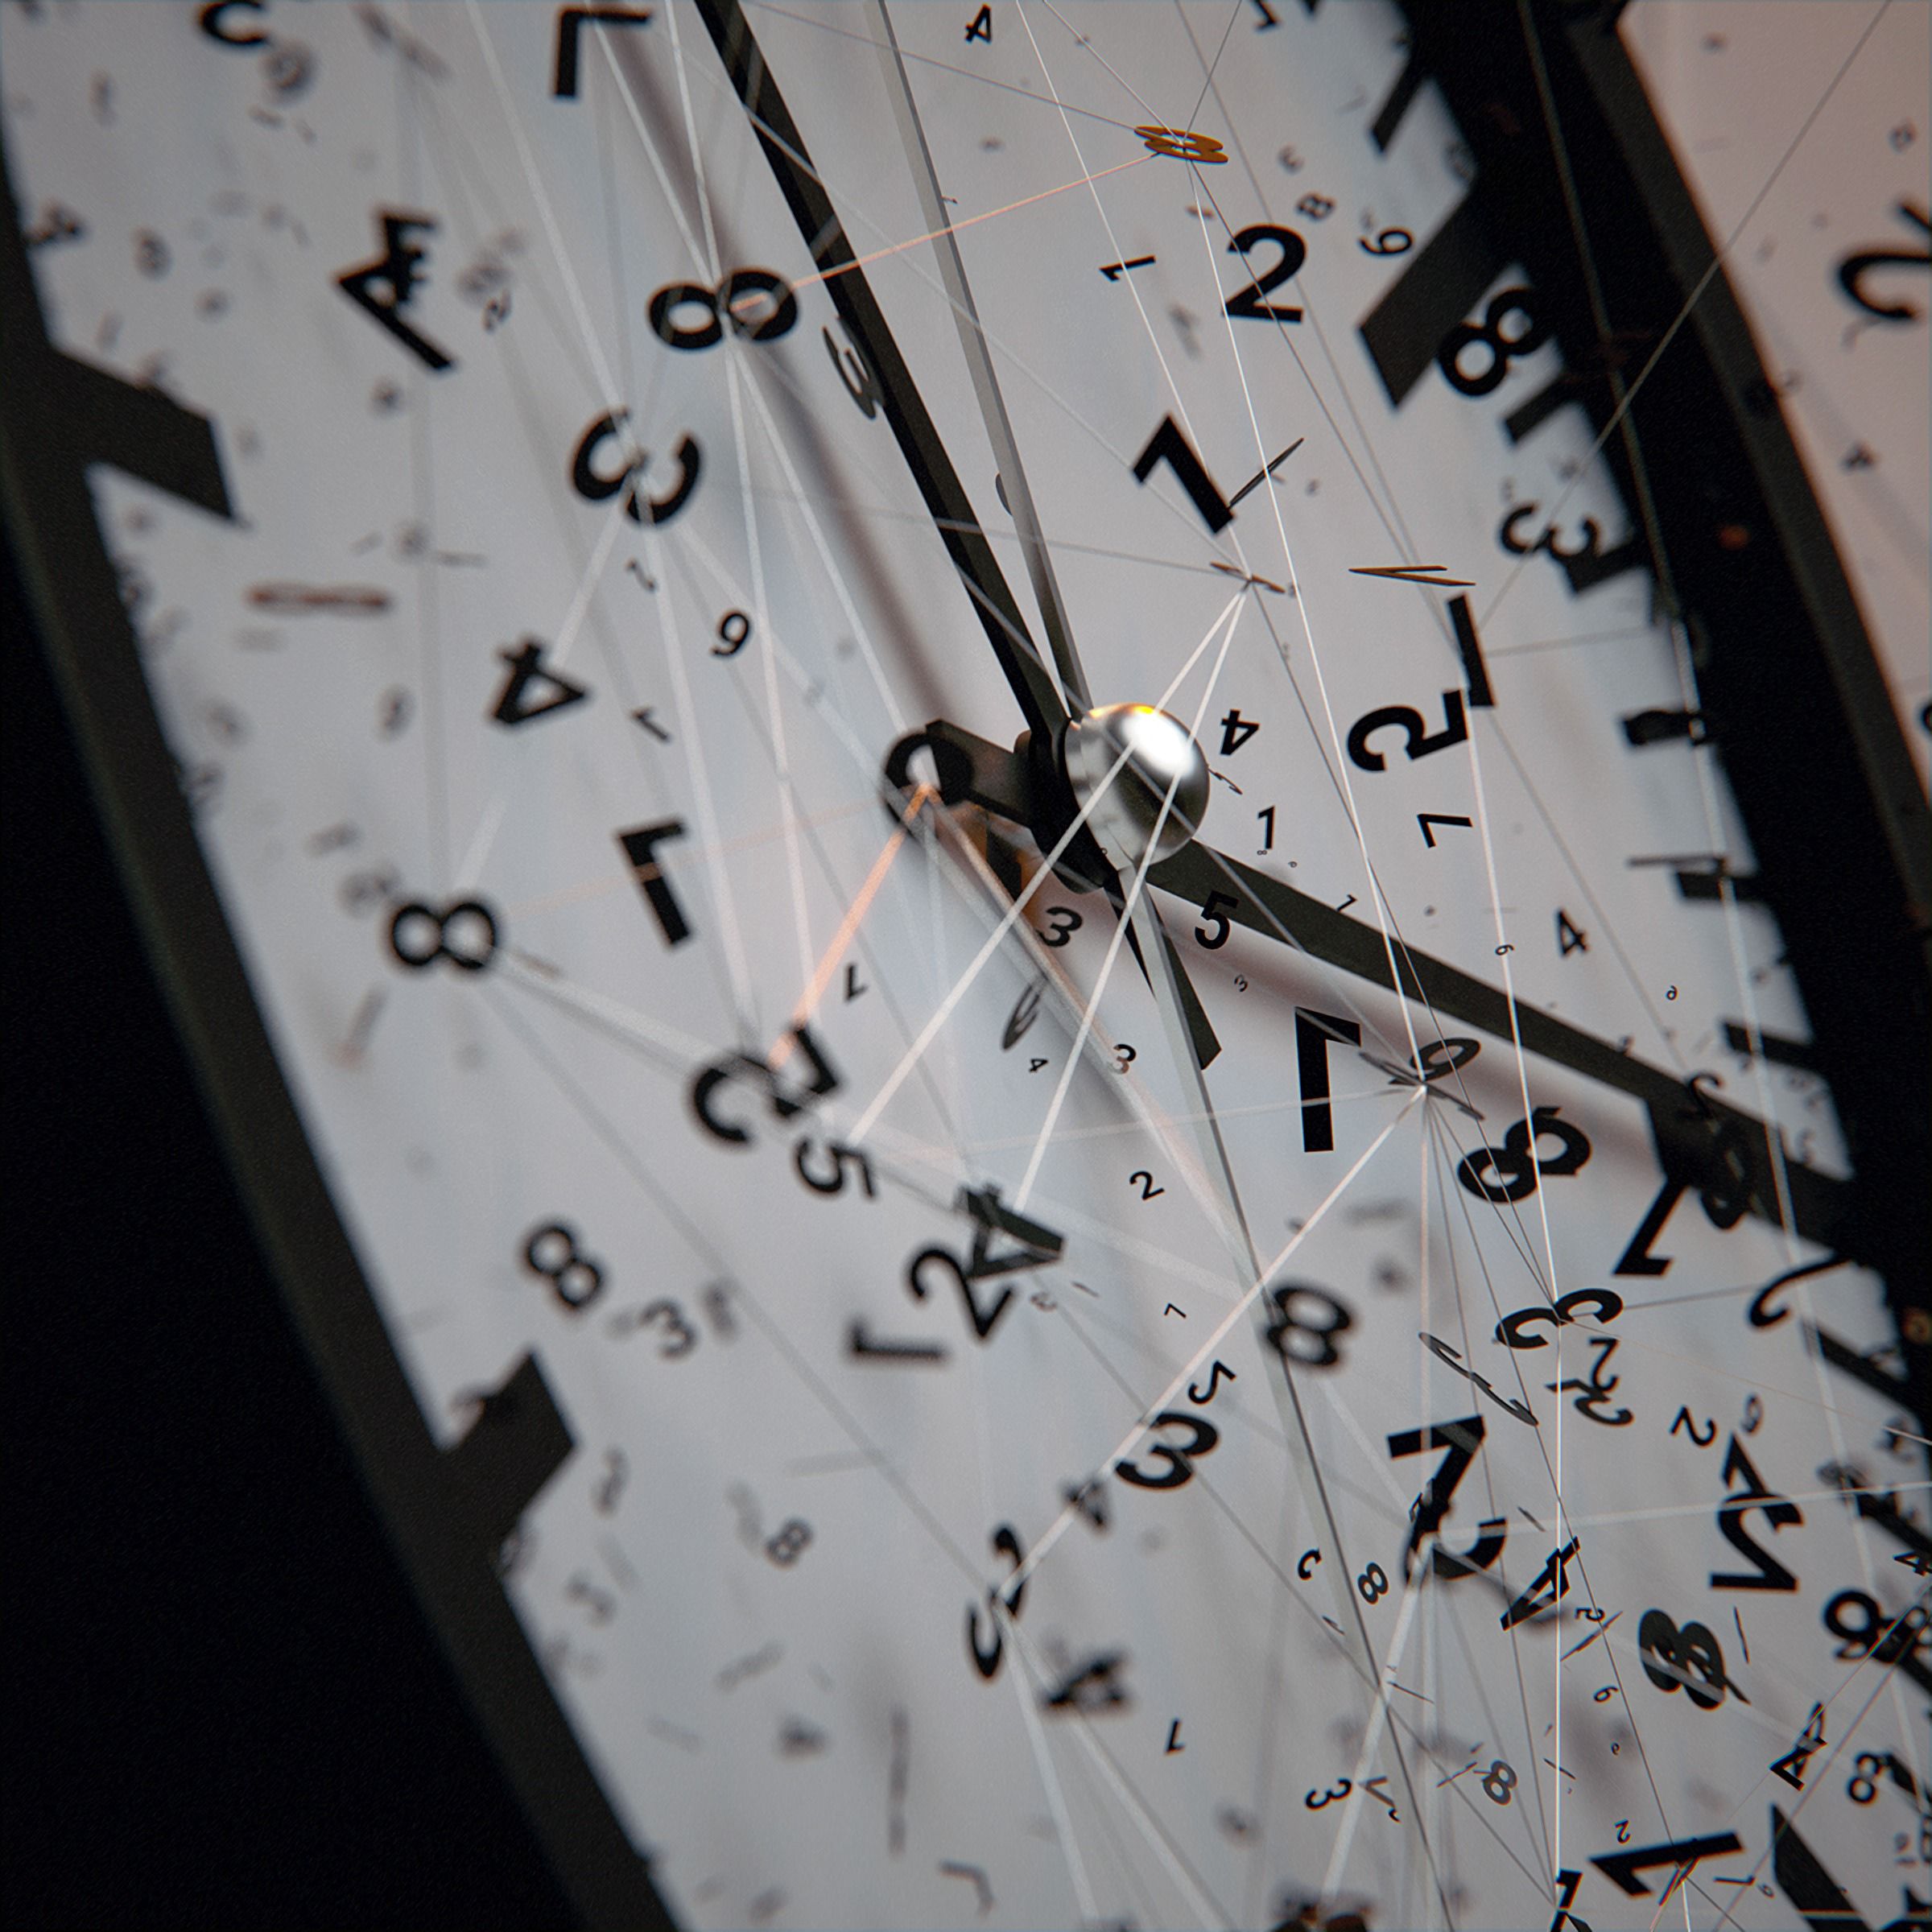 miscellanea, clock, numbers, dial, intricate, miscellaneous, clock face, lines, confused, arrows Smartphone Background